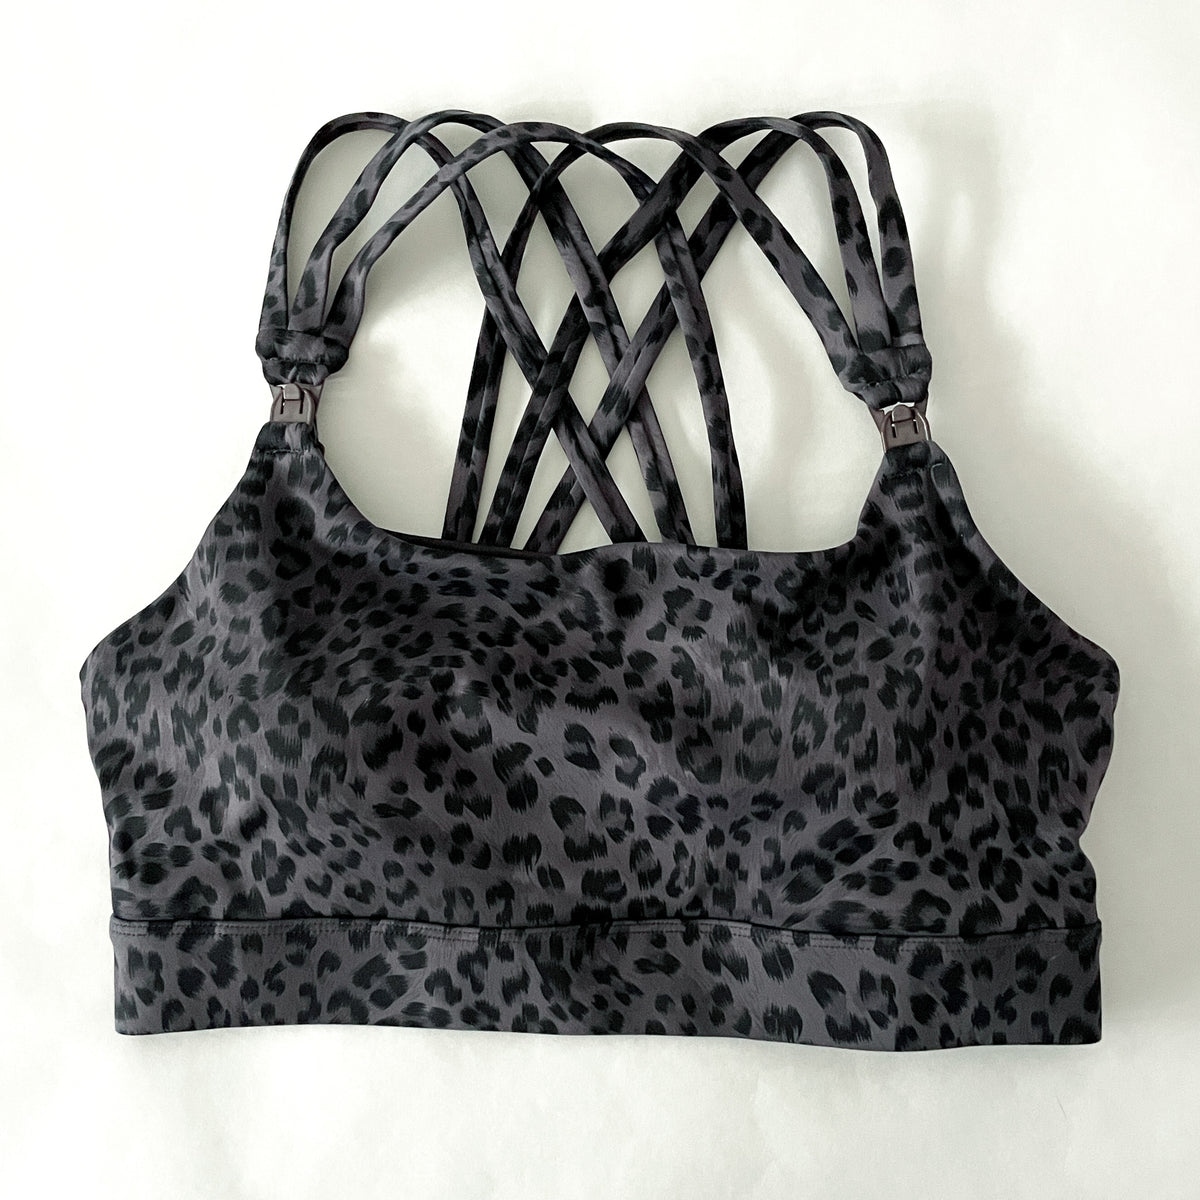 Run With The Lions Sports Bra- Leopard